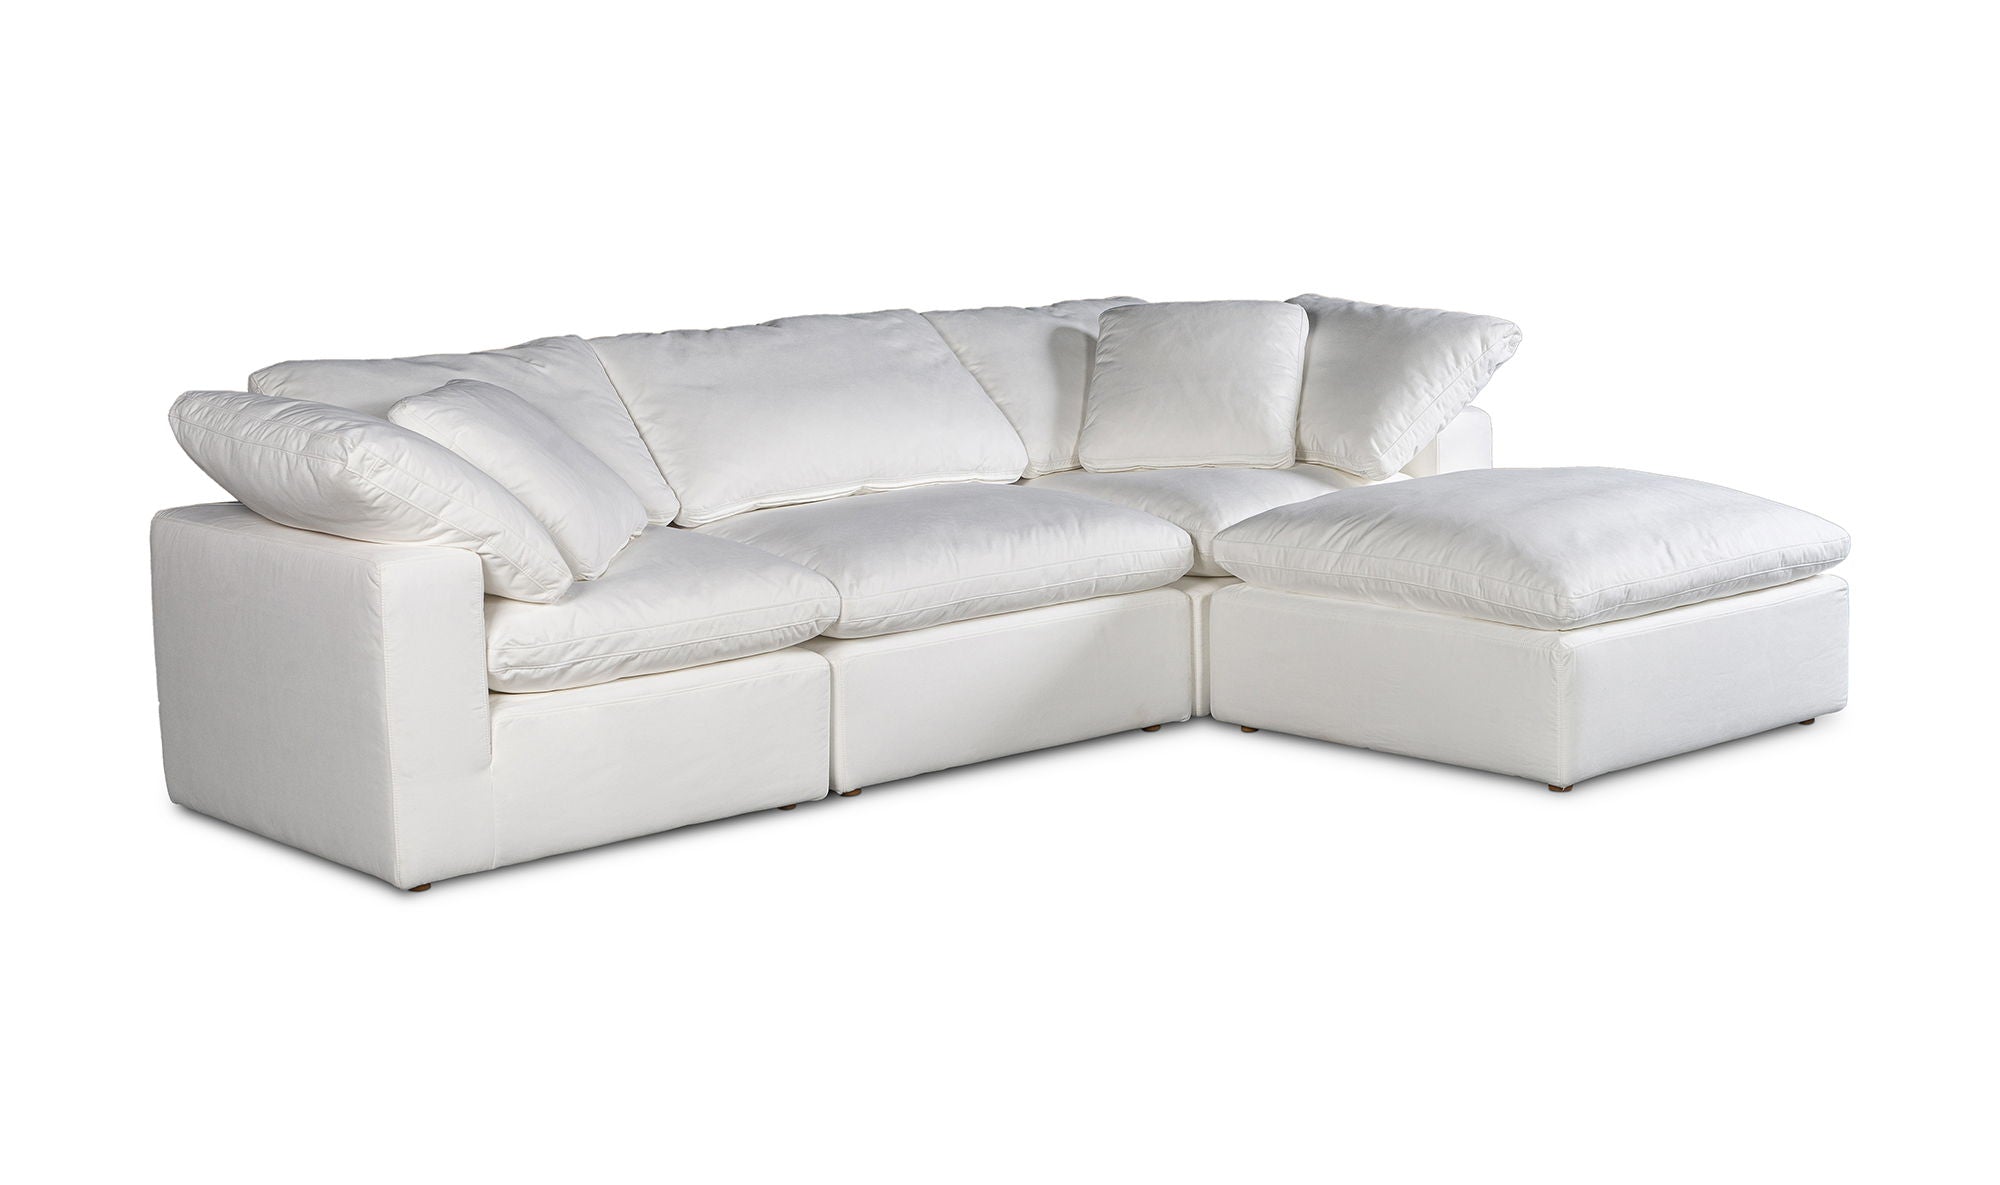 Clay Lounge Modular Sectional - LiveSmart Fabric - Cream White - Comfortable and Stylish Living Room Furniture